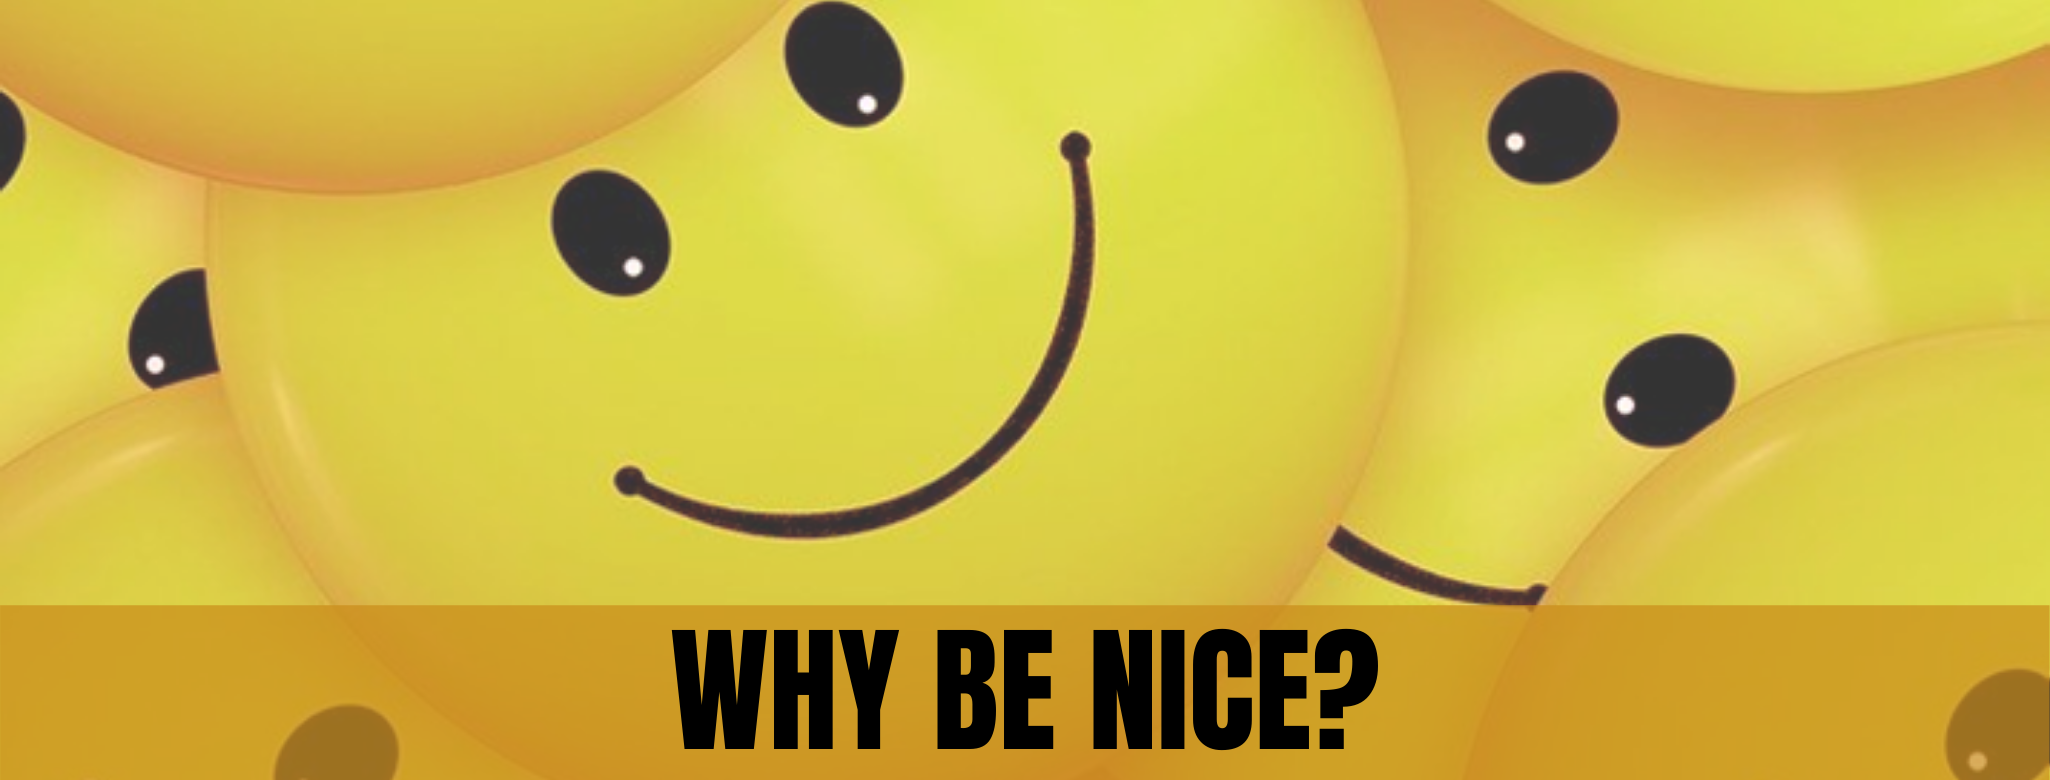 Why be nice? Yellow smiley faces